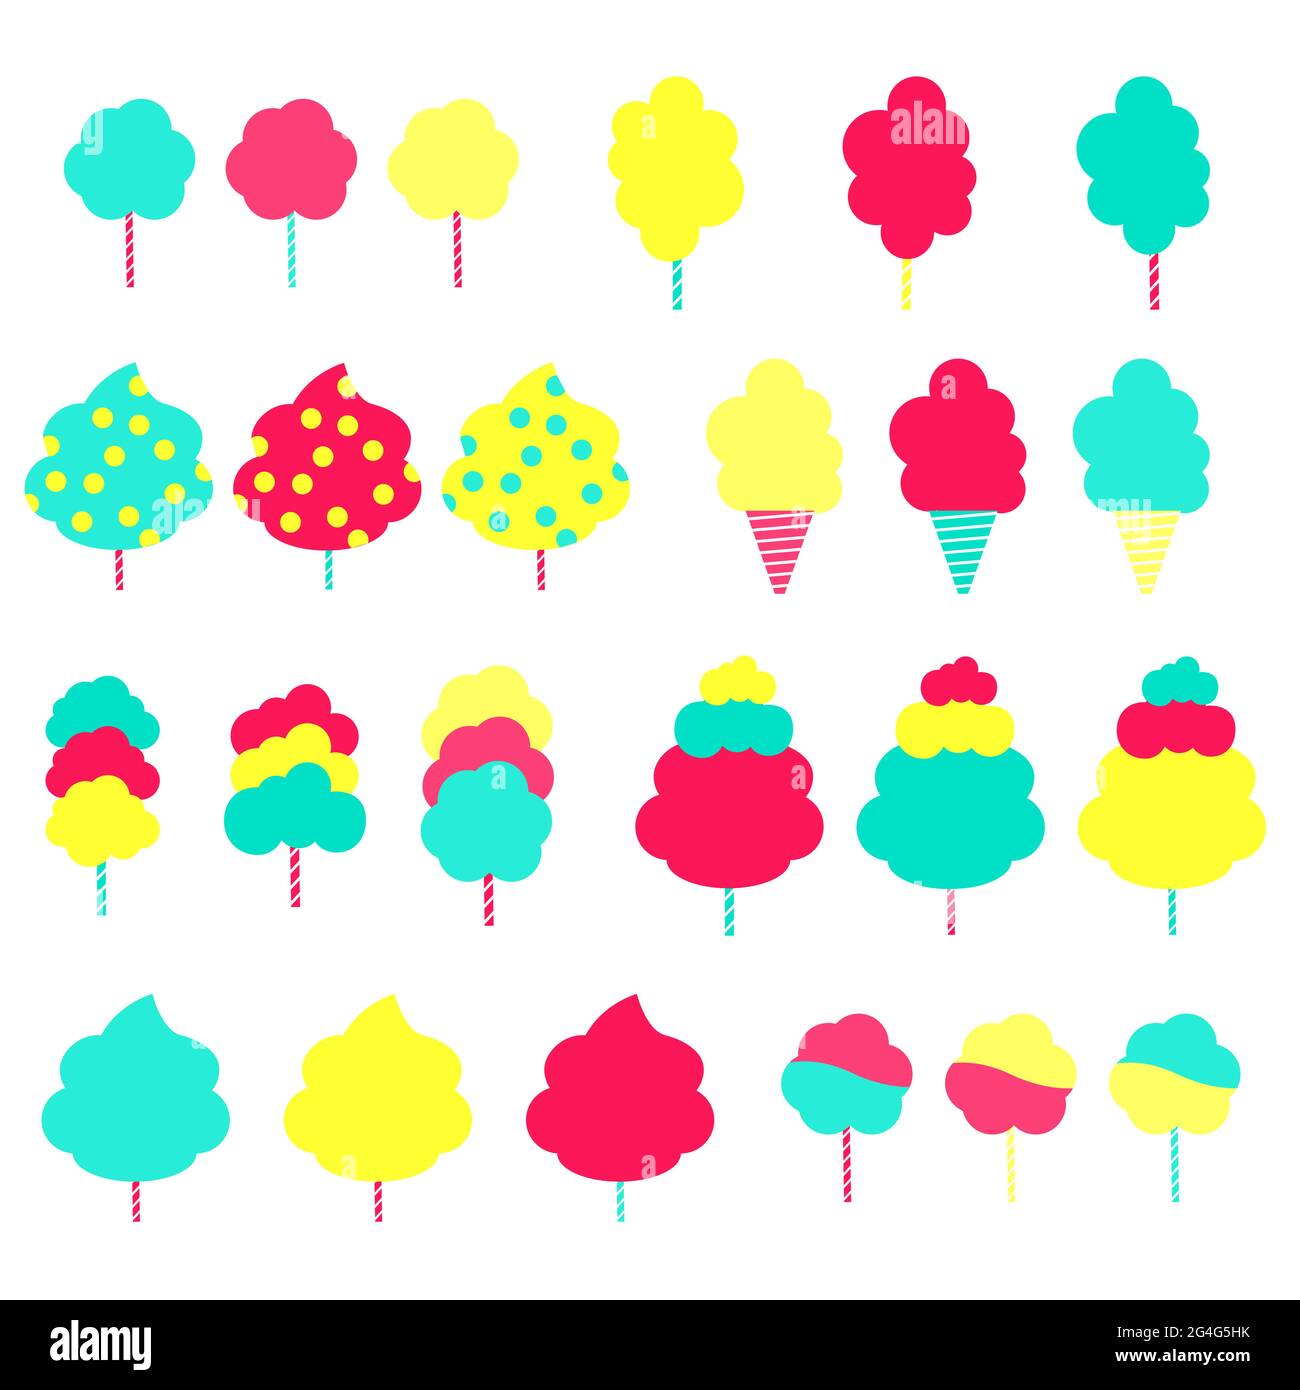 Group of colorful cotton candy in various formats. Isolated. White background. Stock Vector